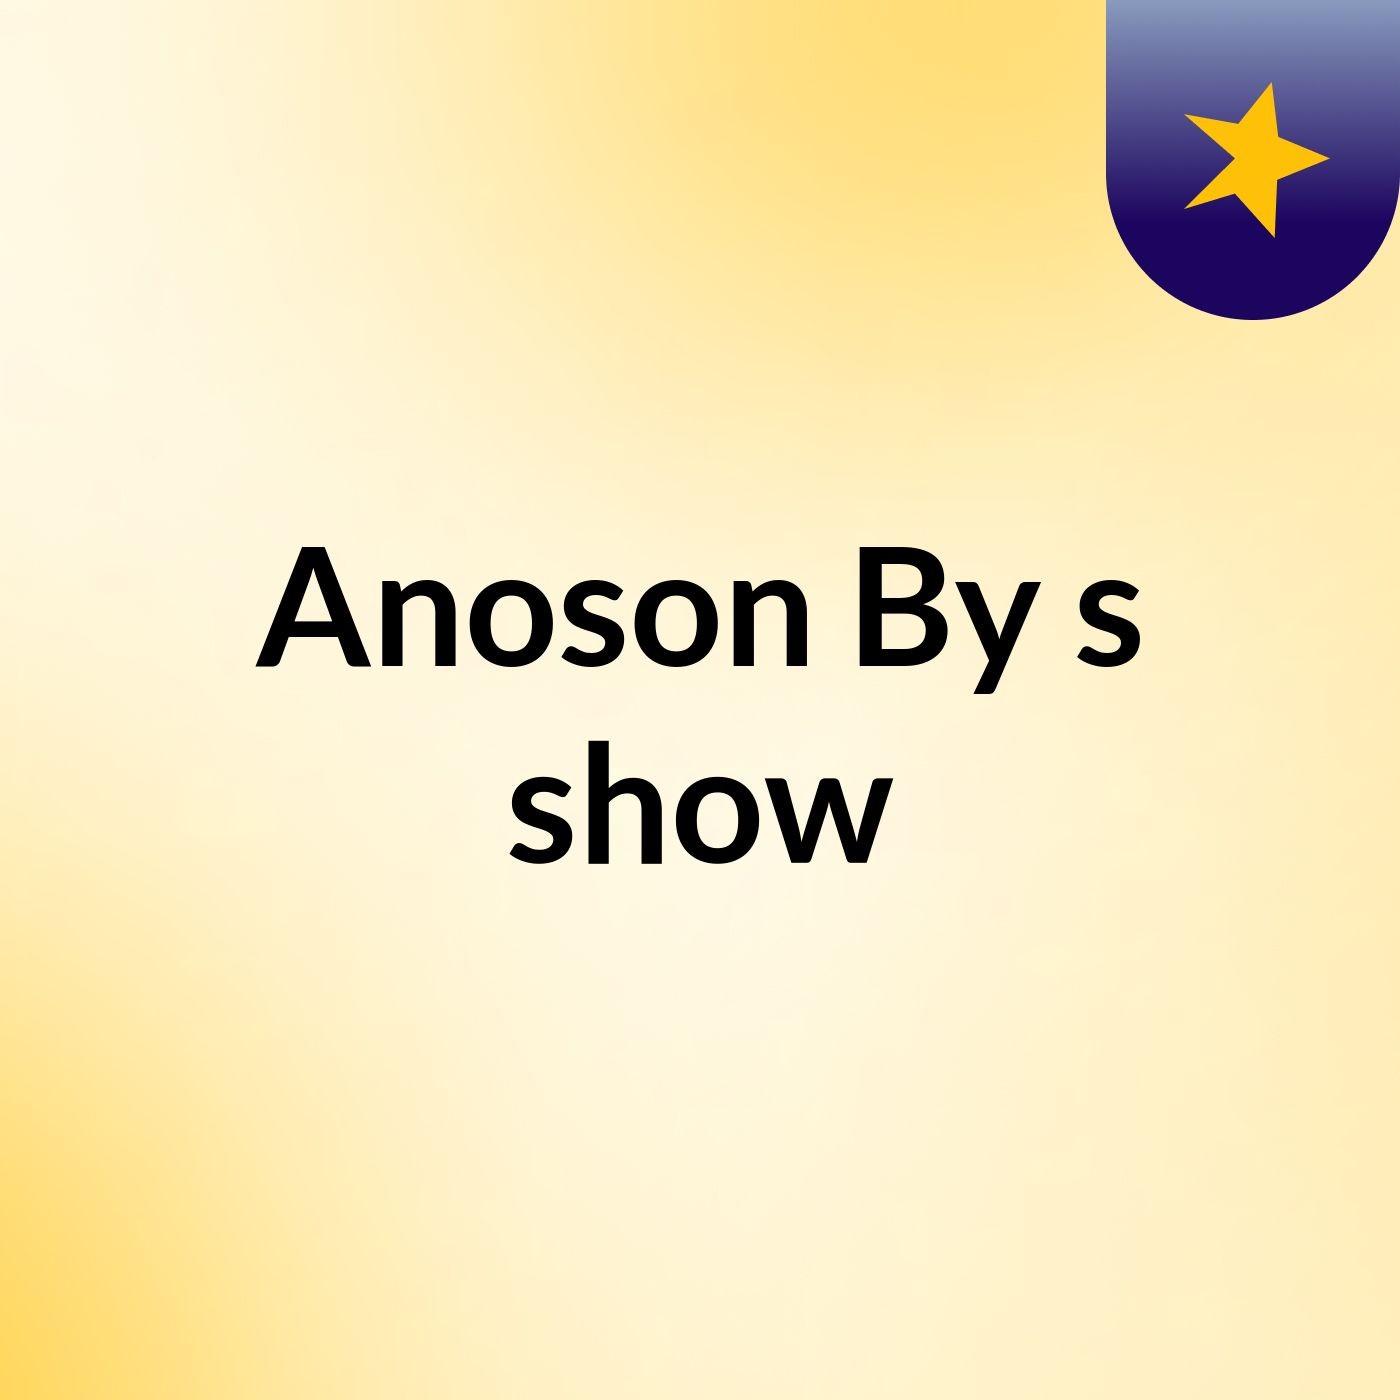 Anoson By's show